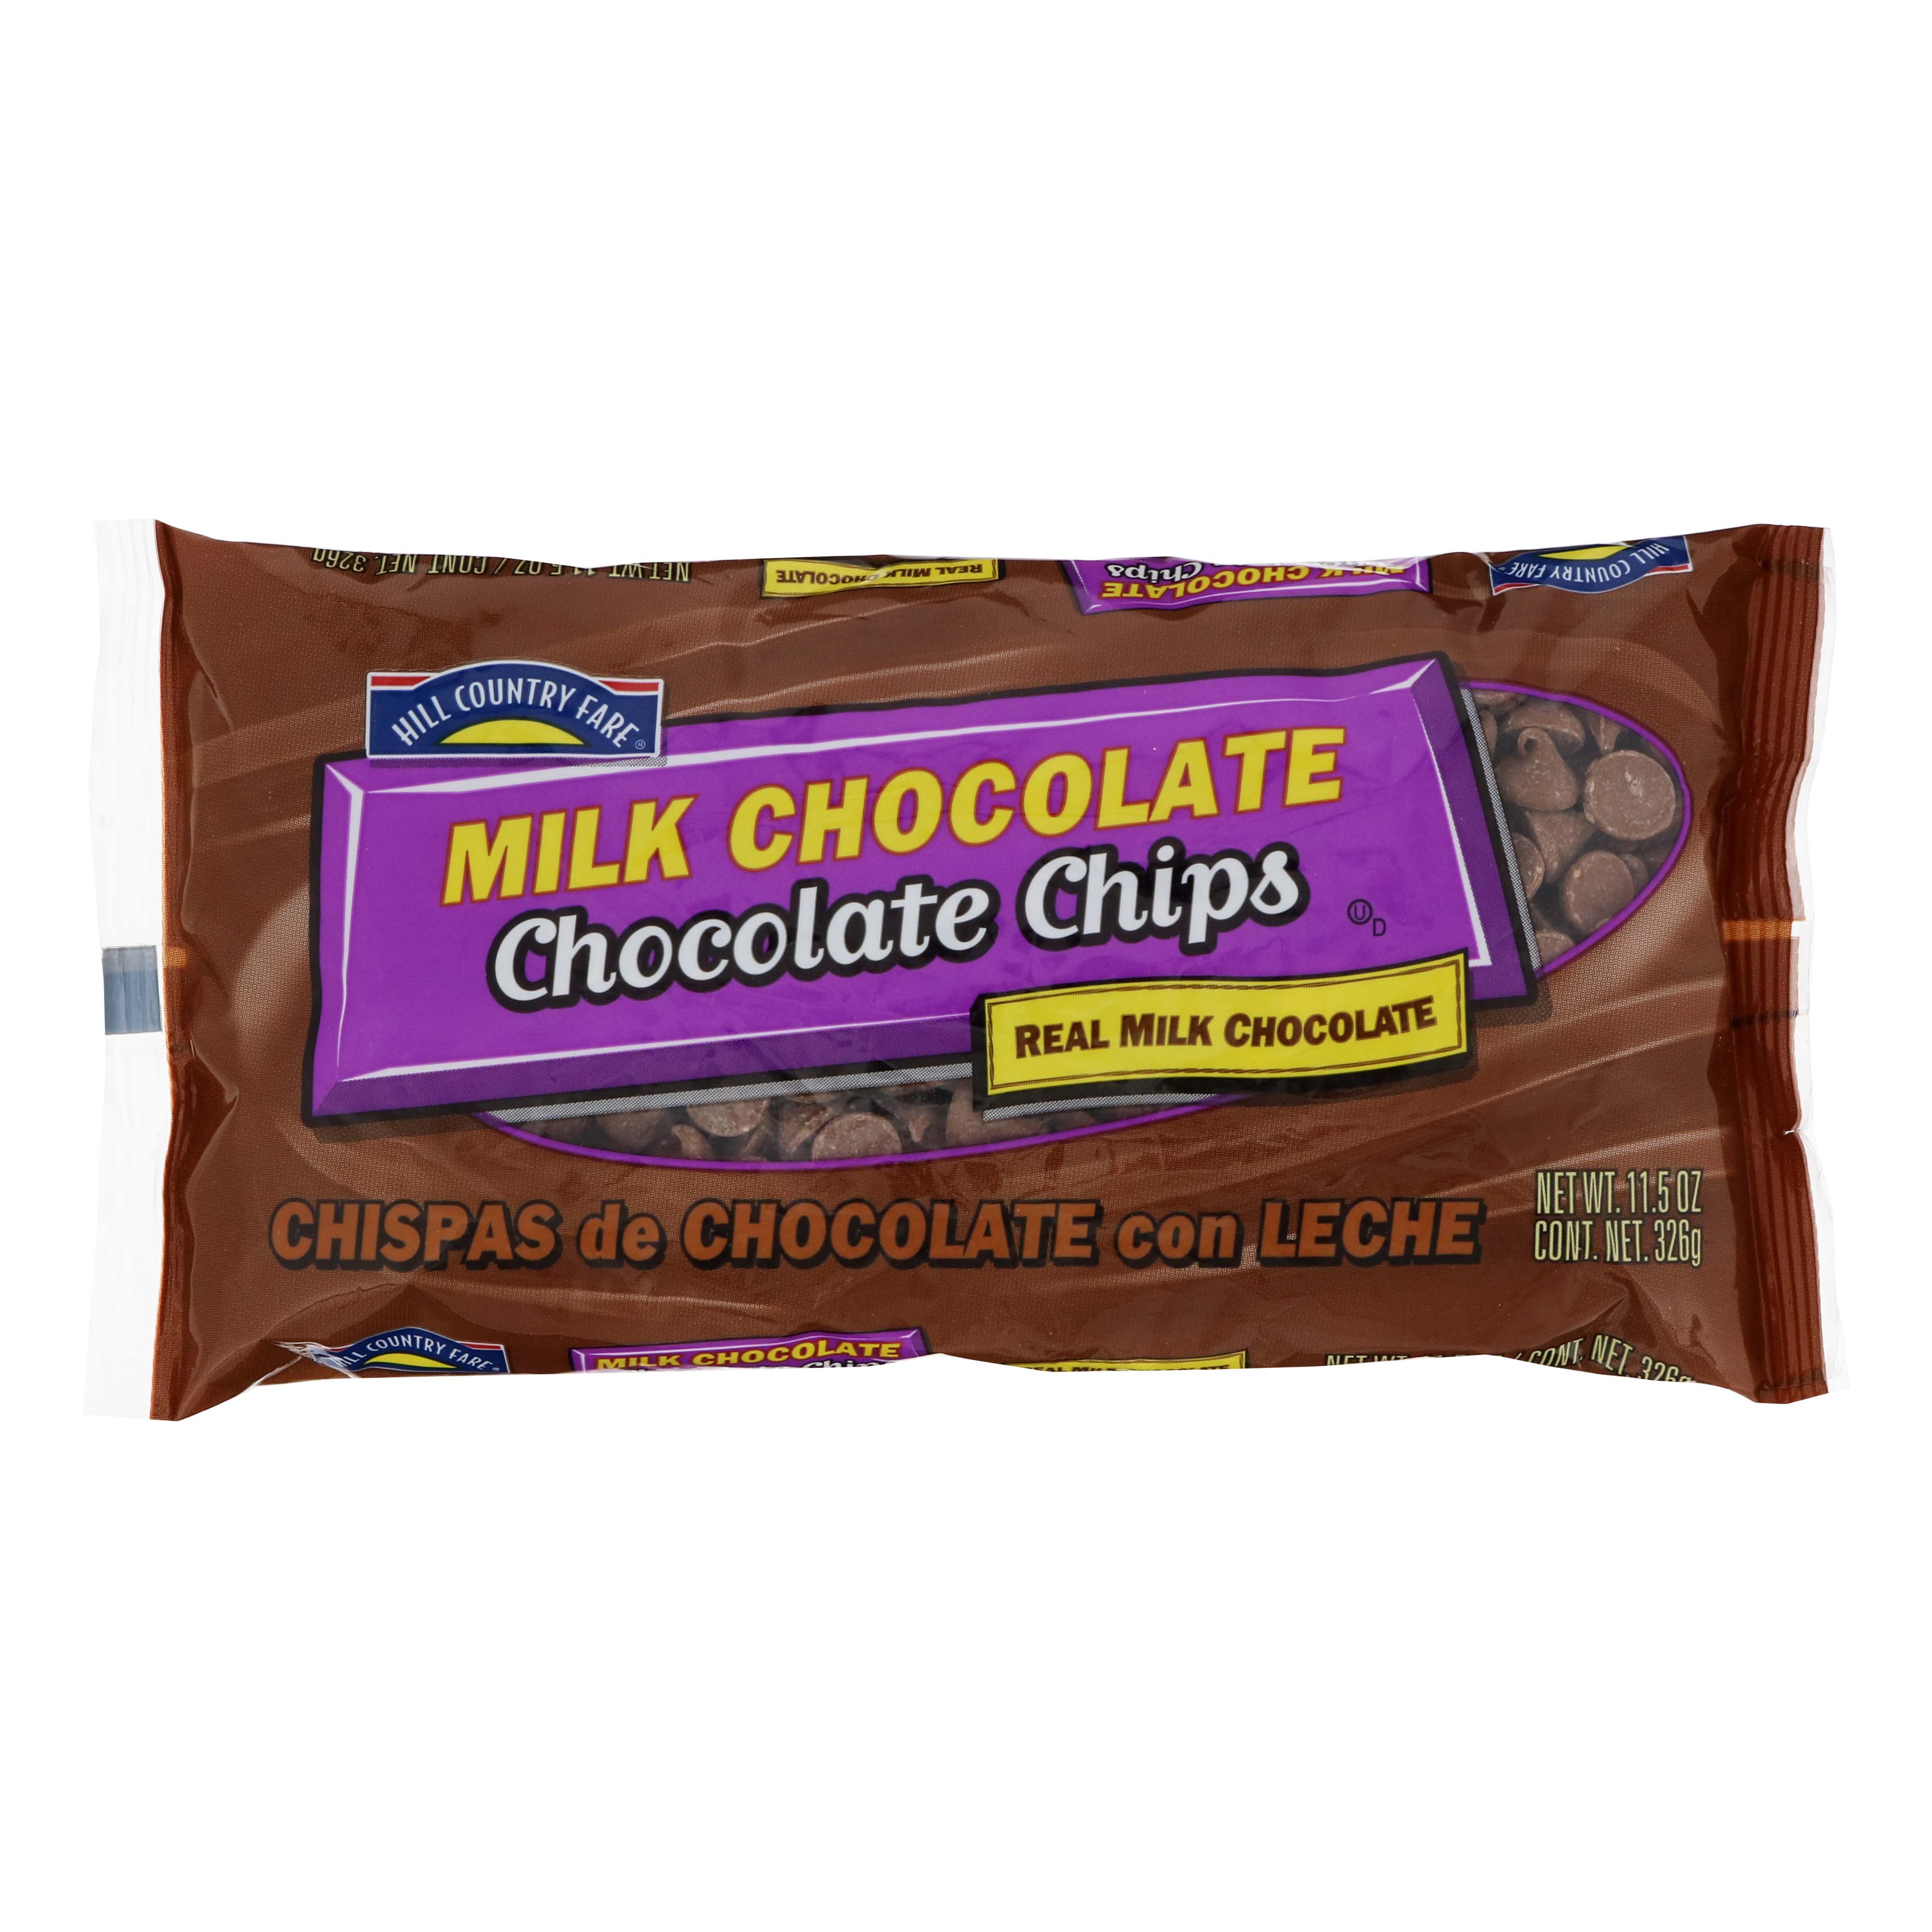 Hill Country Fare Milk Chocolate Chocolate Chips